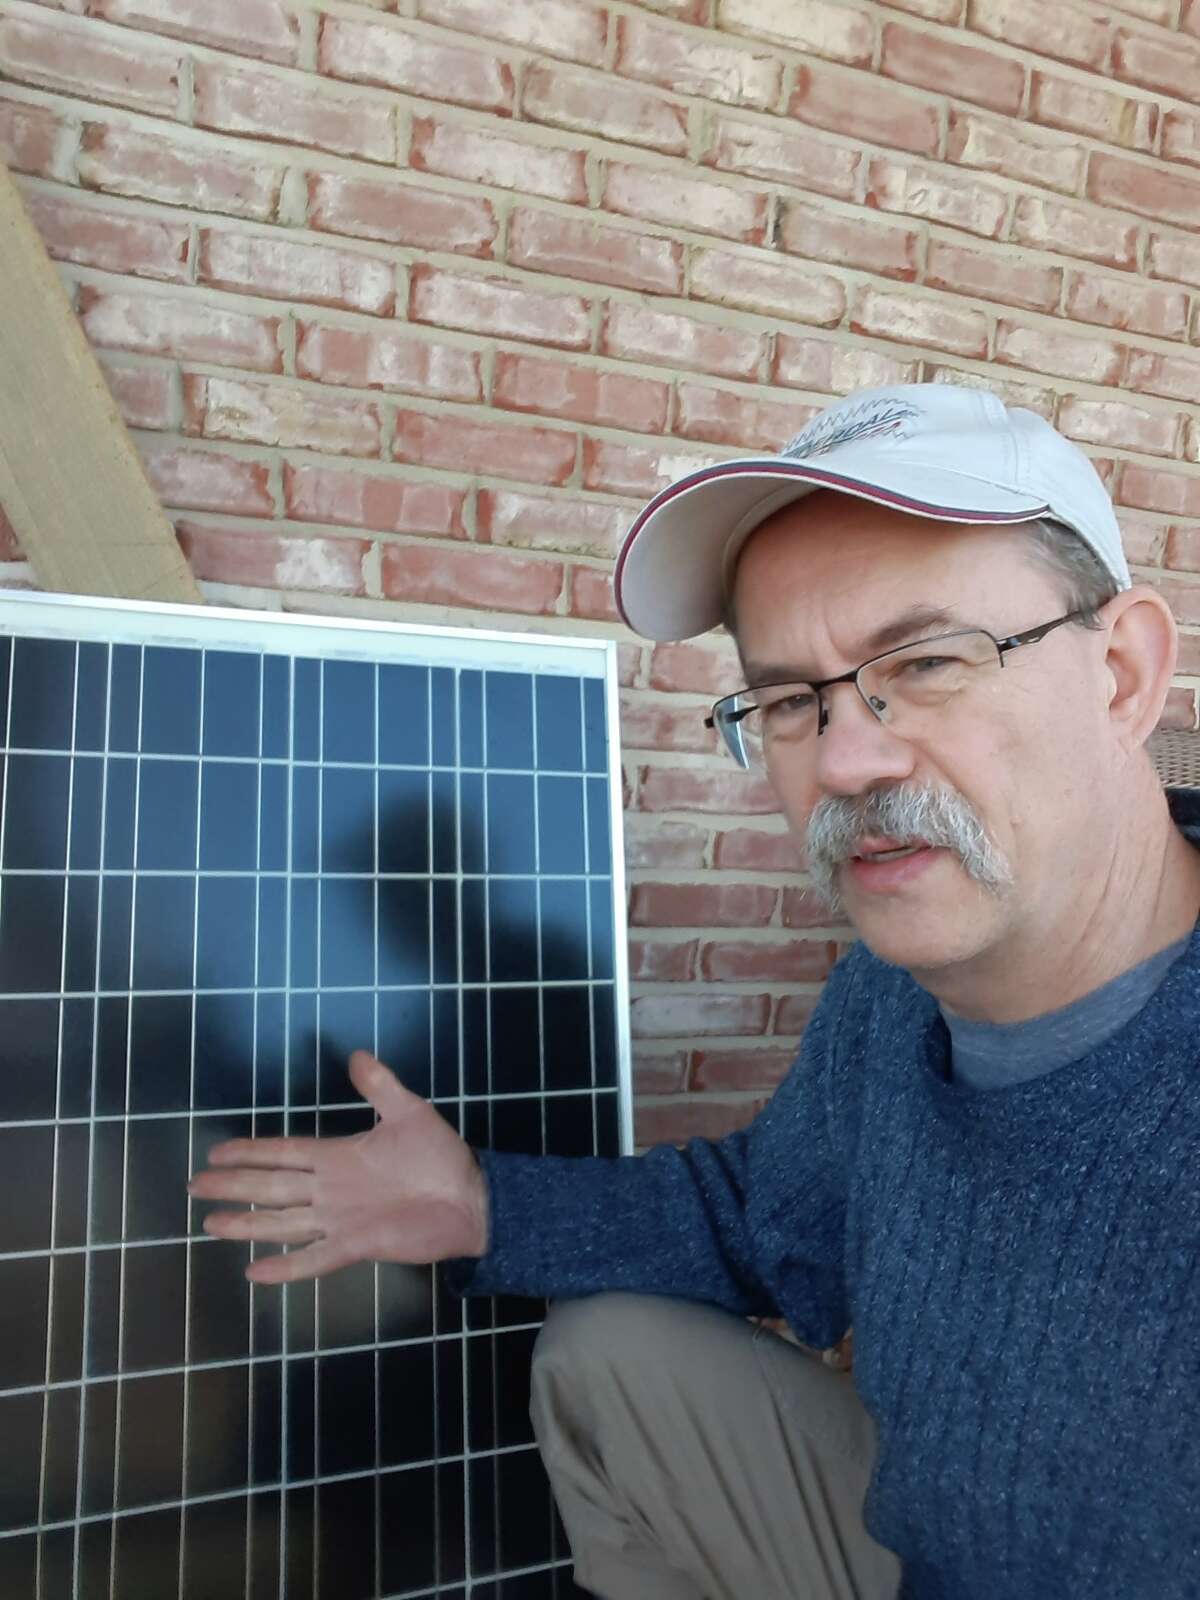 On Tuesday, March 14, the Piasa Palisades Group, Sierra Club Speakers Series (hybrid) will present Kevin Mckee, solar expert and a member of the Sierra Club.